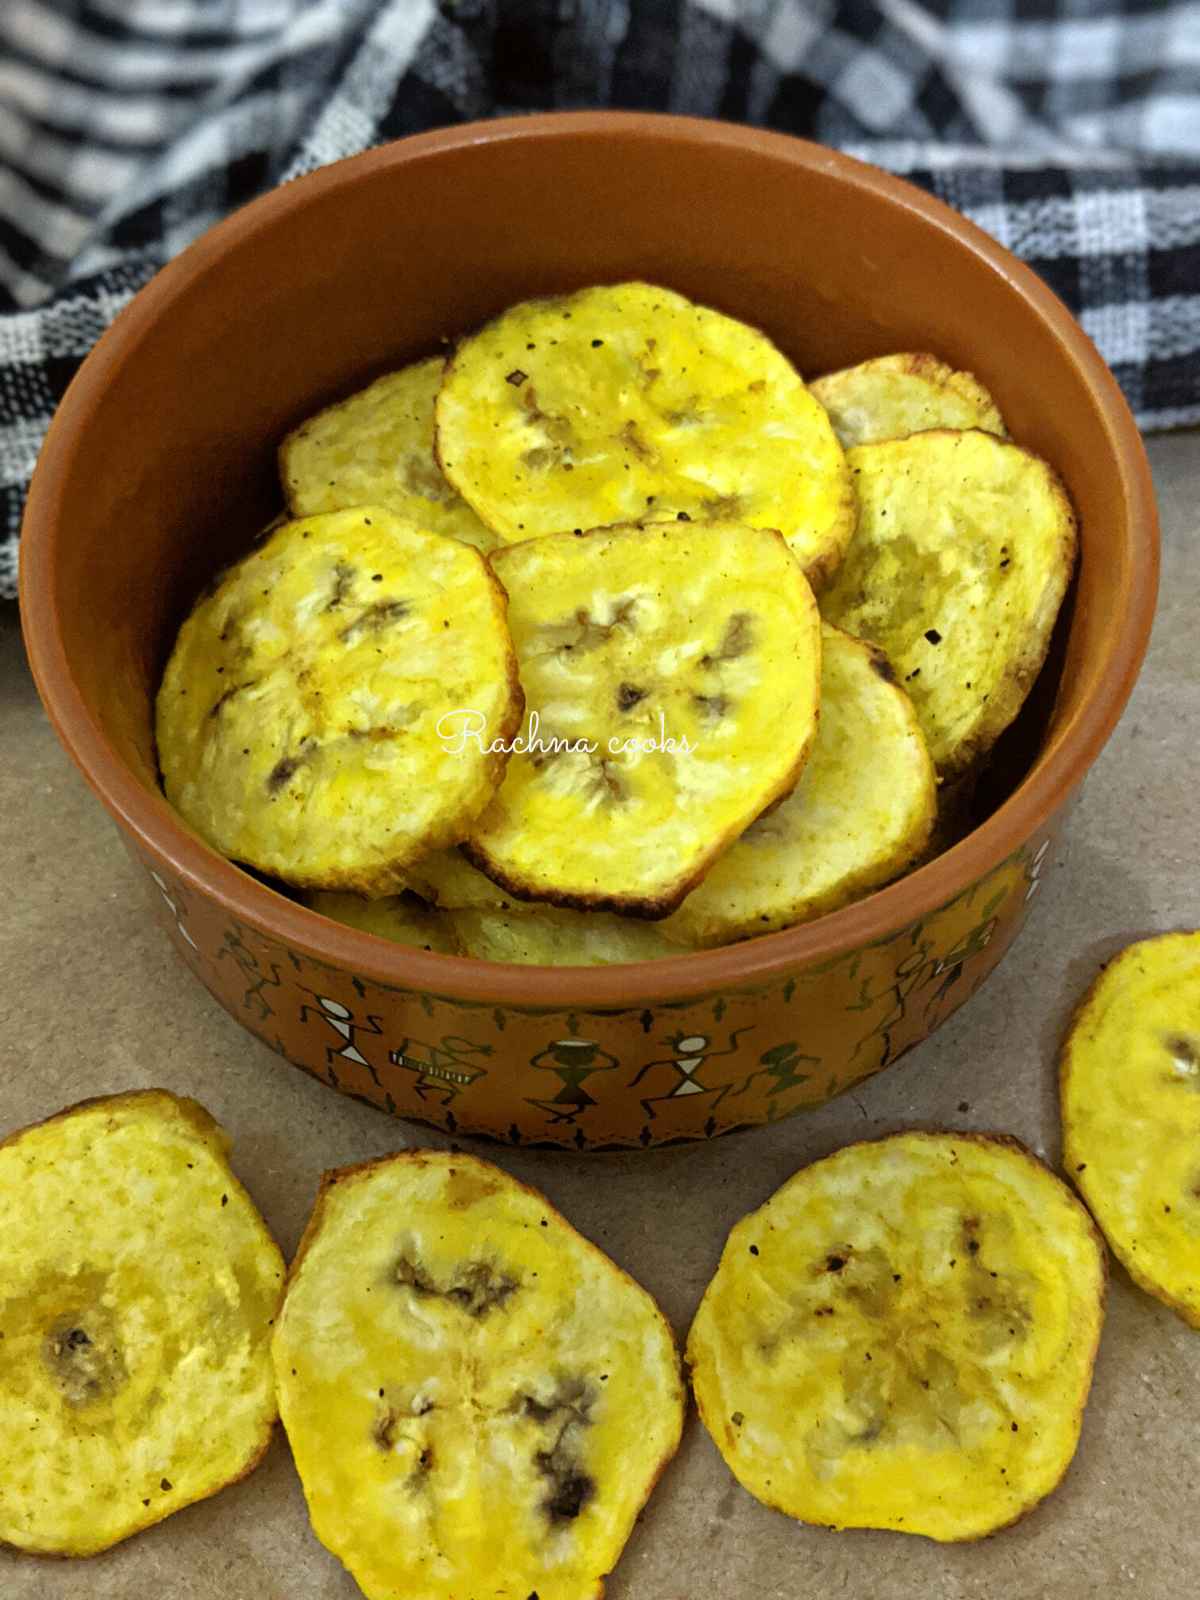 Golden plantain chips after air frying in a brown bowl. A few are also strewn down.